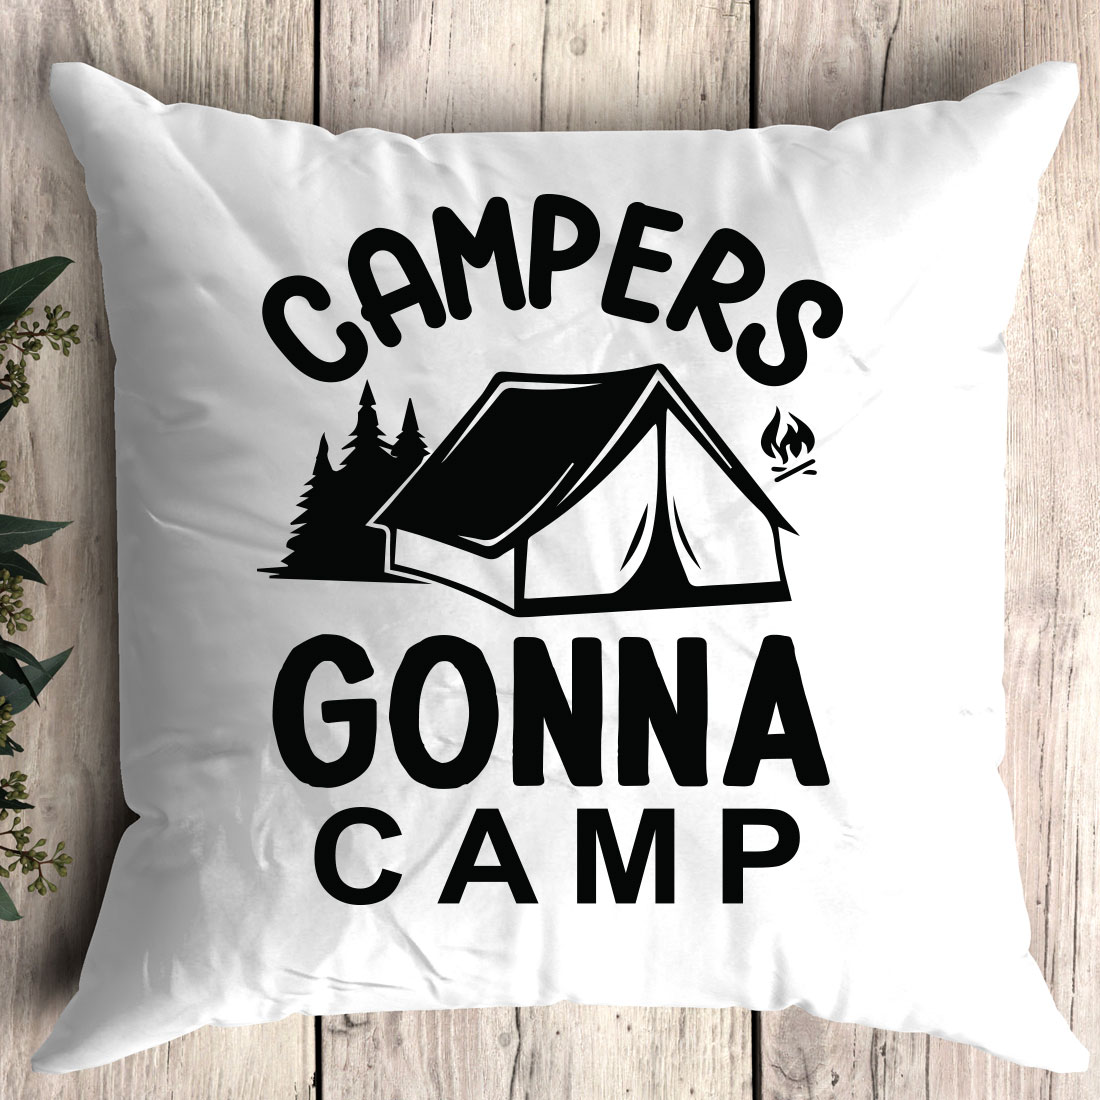 Pillow that says campers gonna camp on it.